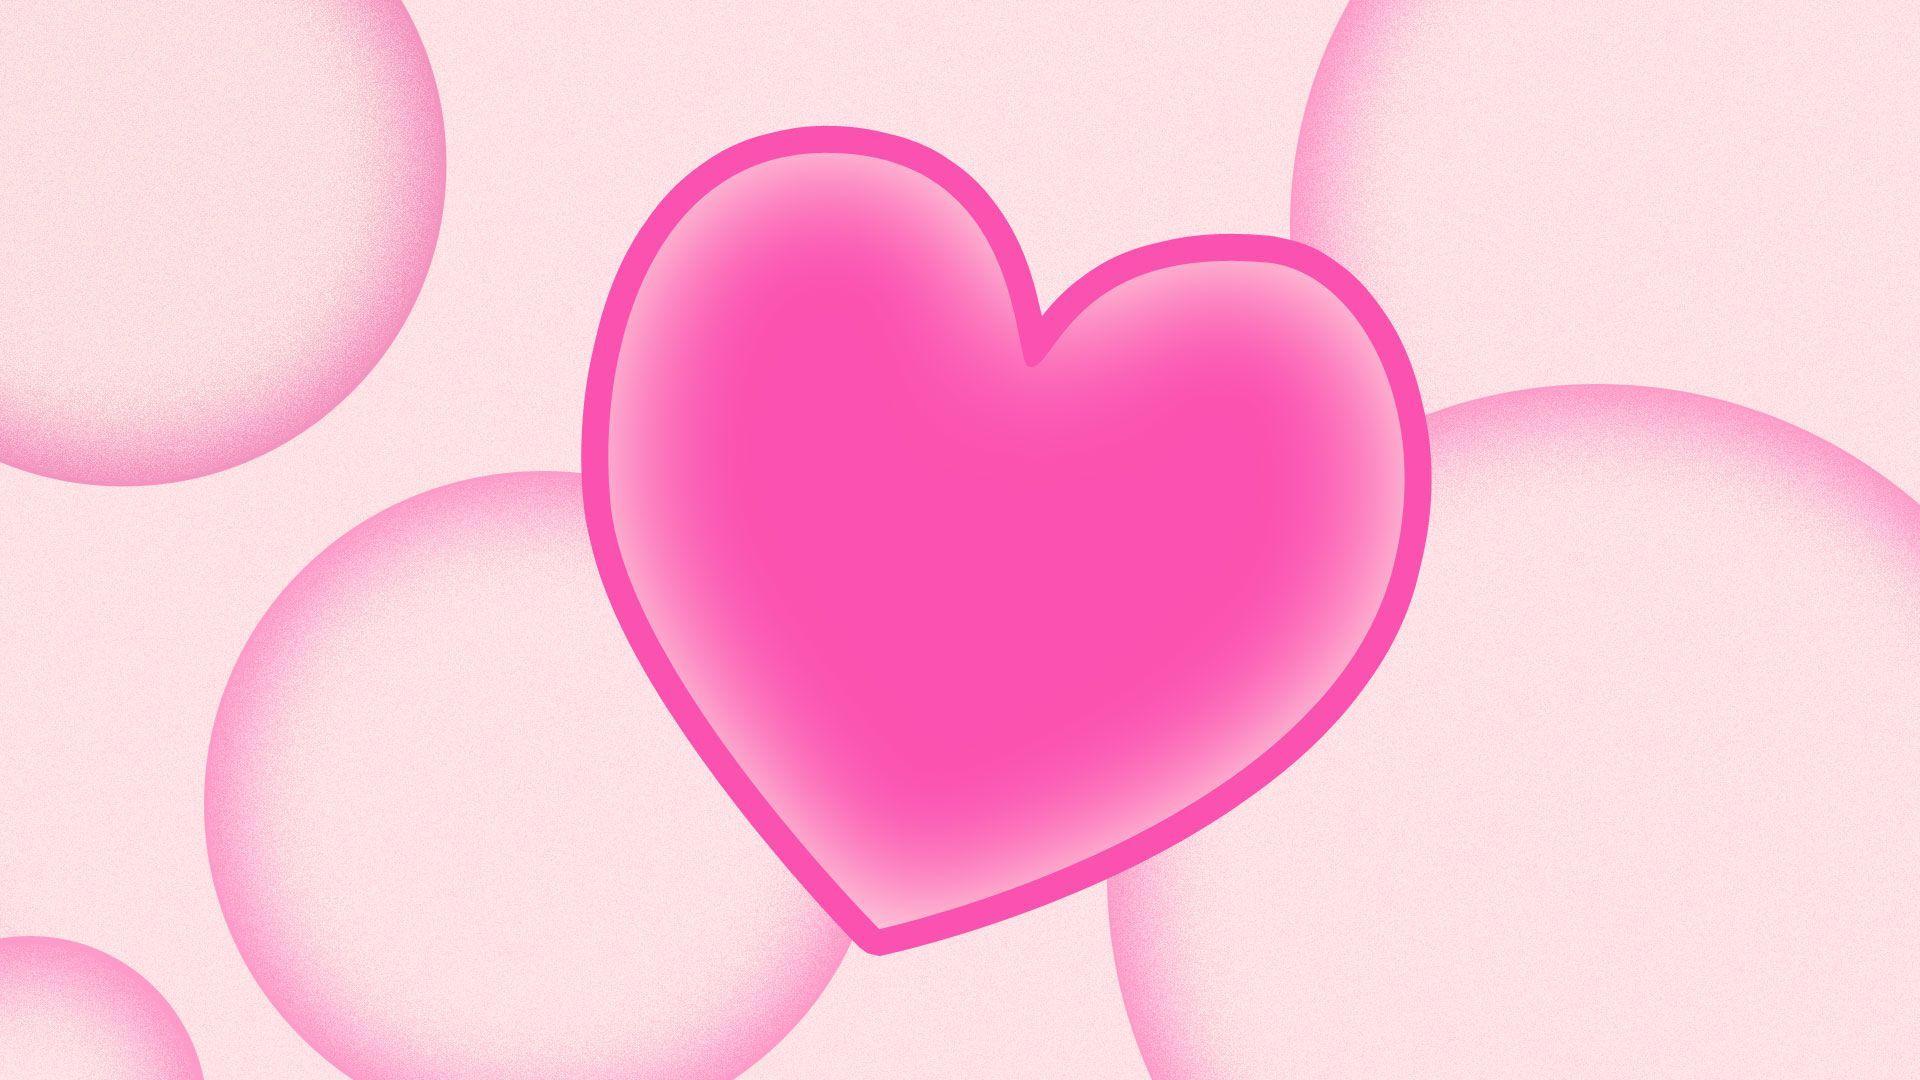 Wallpaper For > Cool Pink Hearts Background Wallpaper